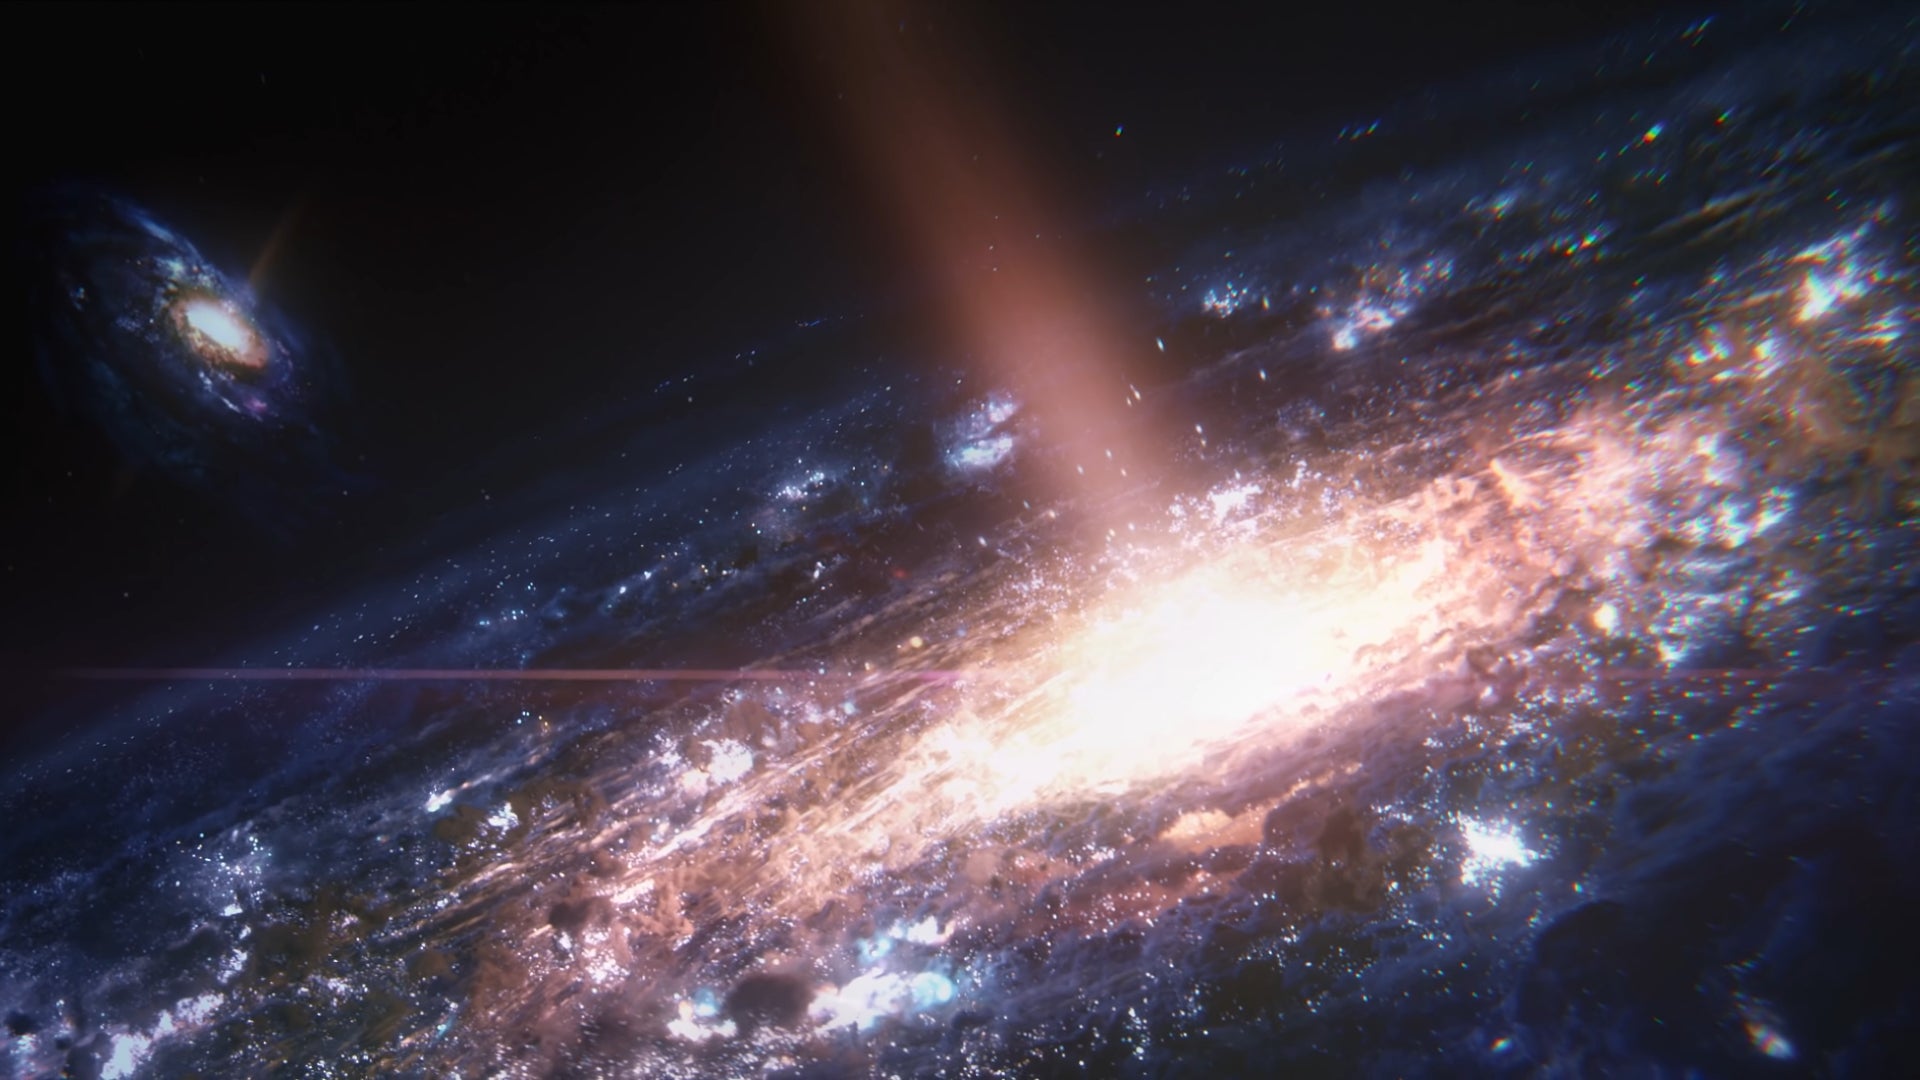 The Milky Way in the foreground with the Andromeda galaxy in the background, in the opening shot of the Mass Effect 5 teaser trailer.